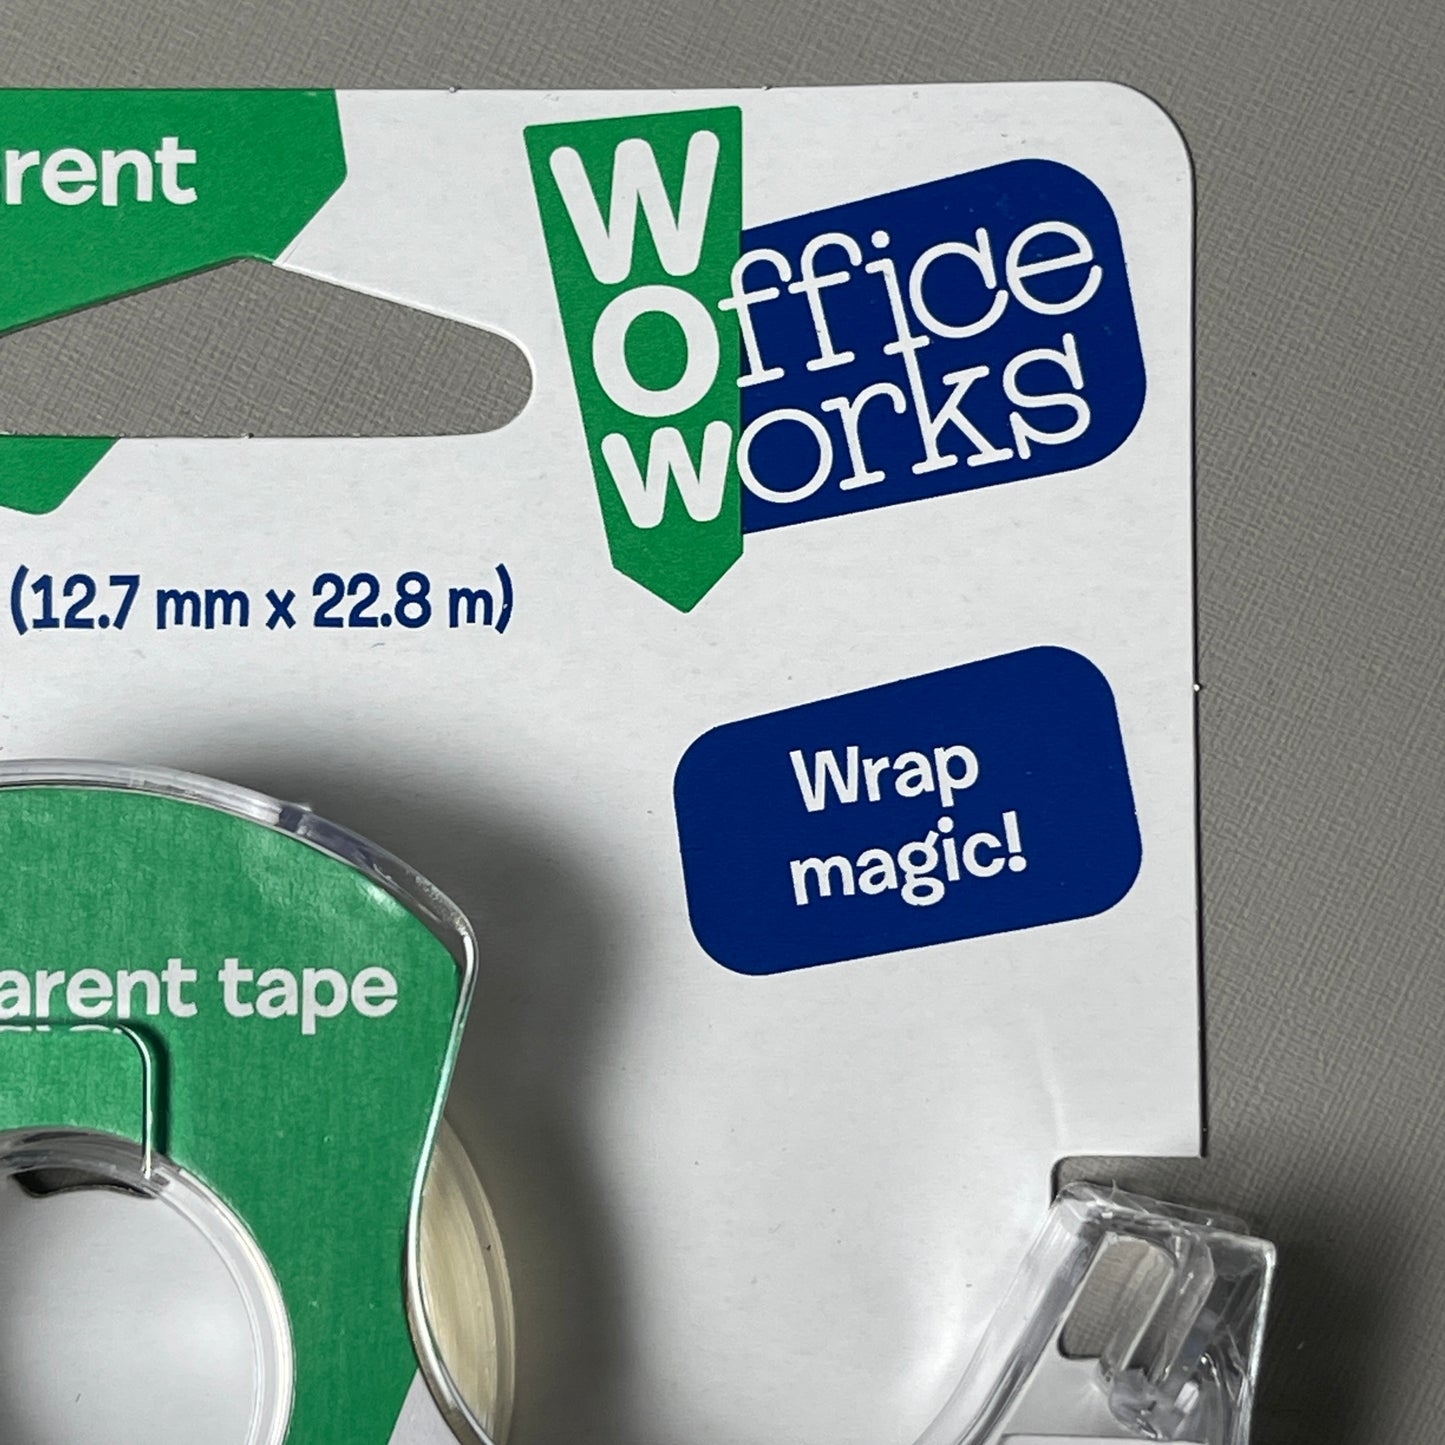 WOW Office Works Transparent Tape 6 Pack 1/2" X 25 YD Per Roll